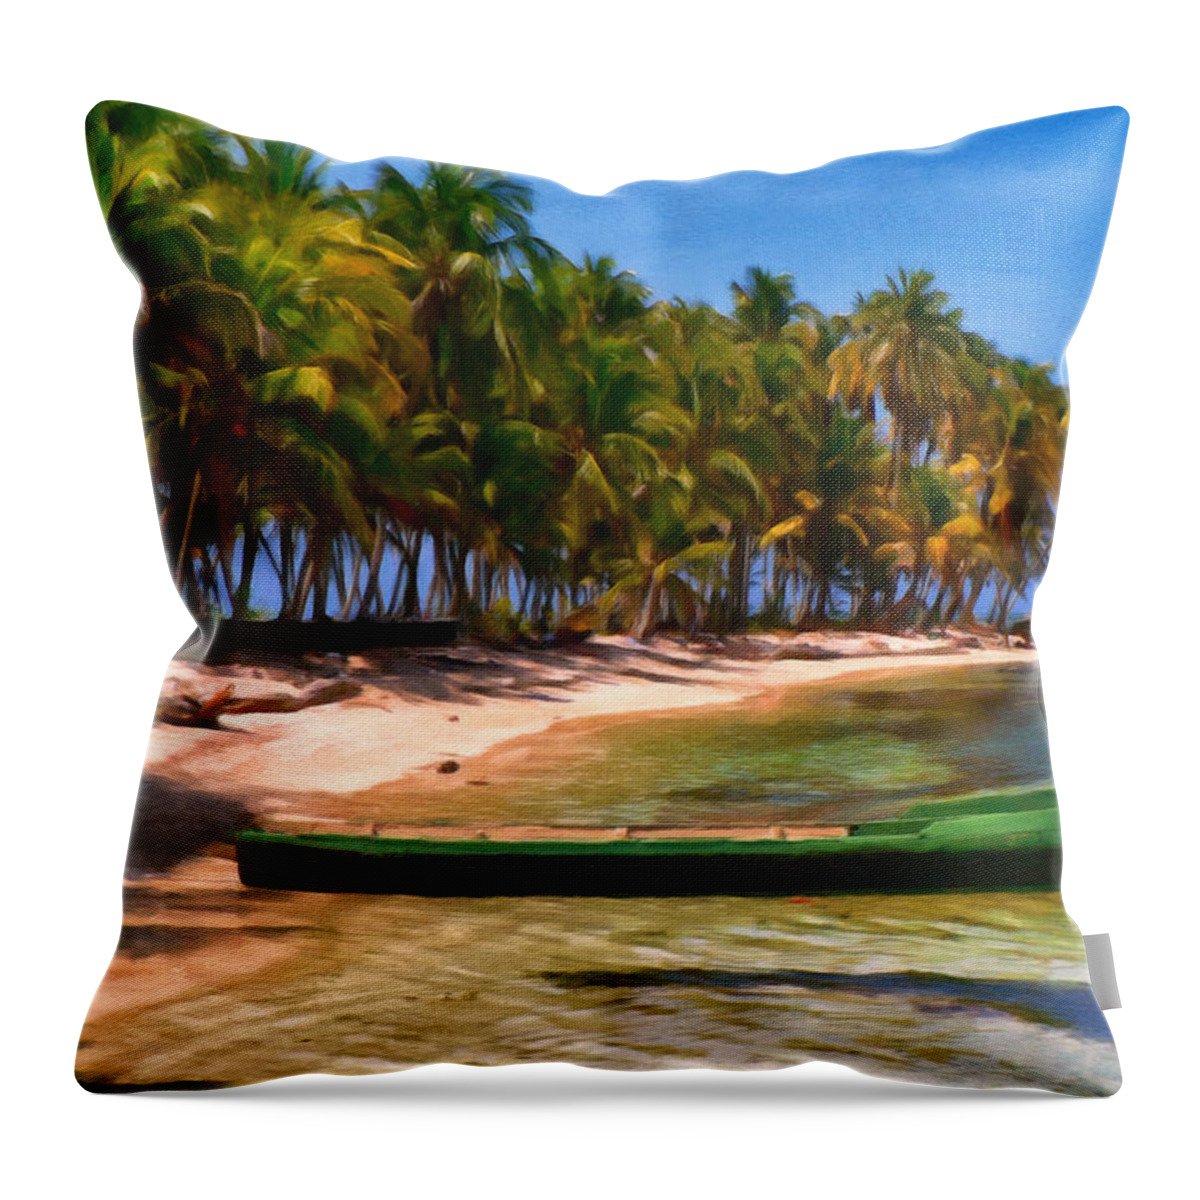 Island Throw Pillow featuring the painting The Green Boat by Michael Pickett